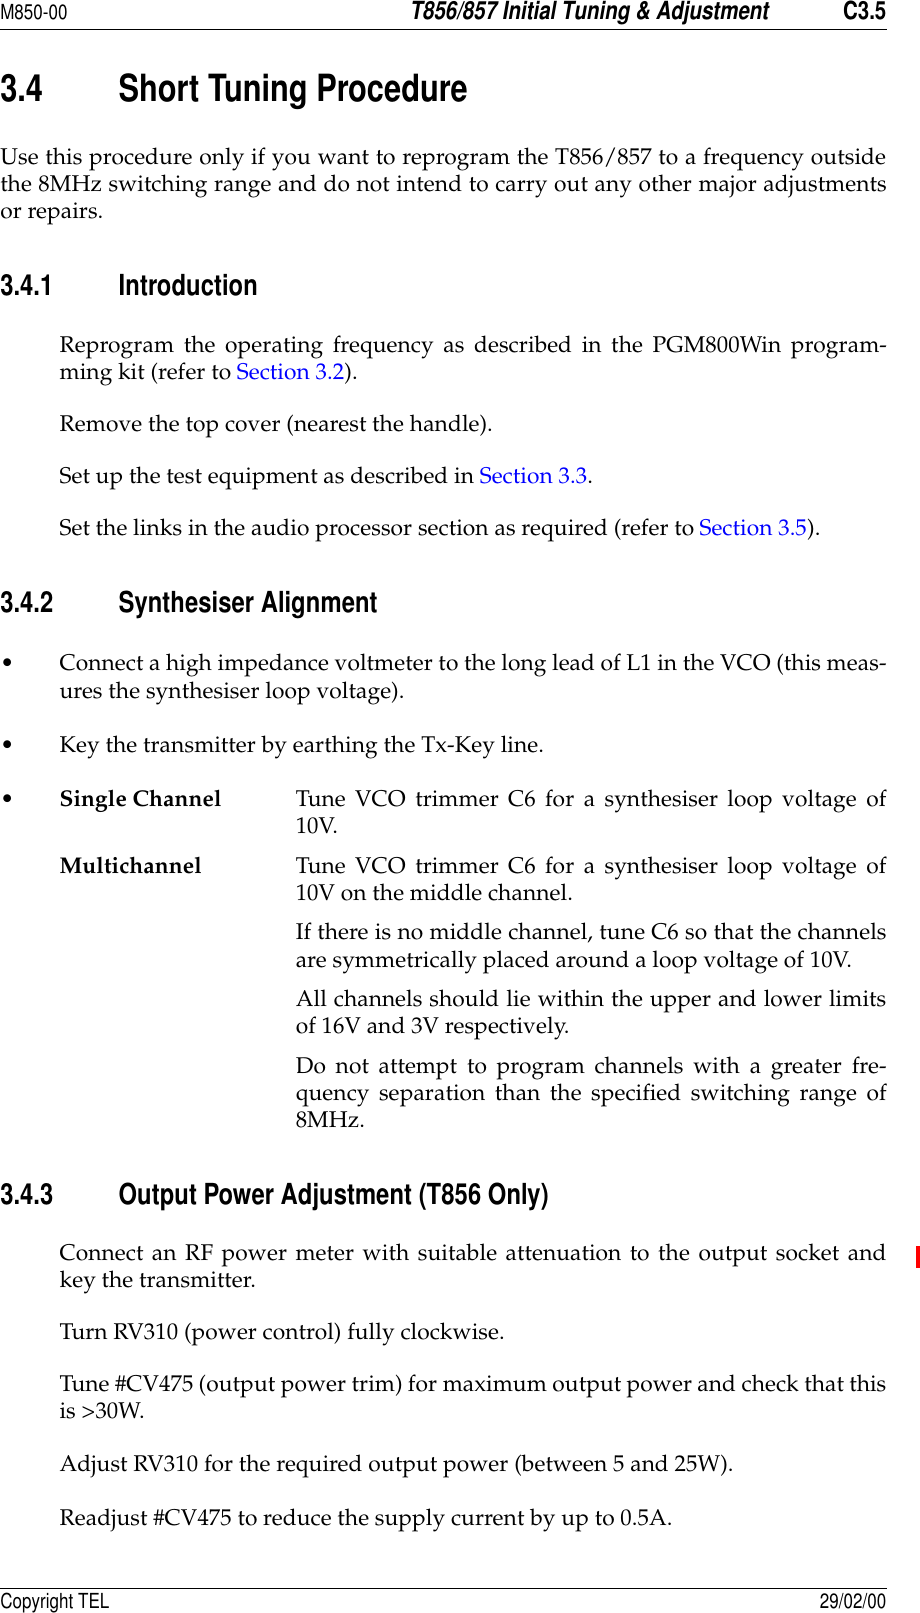 M850-00T856/857 Initial Tuning &amp; AdjustmentC3.5Copyright TEL 29/02/003.4 Short Tuning ProcedureUse this procedure only if you want to reprogram the T856/857 to a frequency outsidethe 8MHz switching range and do not intend to carry out any other major adjustmentsor repairs.3.4.1 IntroductionReprogram the operating frequency as described in the PGM800Win program-ming kit (refer to Section 3.2).Remove the top cover (nearest the handle).Set up the test equipment as described in Section 3.3.Set the links in the audio processor section as required (refer to Section 3.5).3.4.2 Synthesiser Alignment• Connect a high impedance voltmeter to the long lead of L1 in the VCO (this meas-ures the synthesiser loop voltage).• Key the transmitter by earthing the Tx-Key line.•Single Channel Tune VCO trimmer C6 for a synthesiser loop voltage of10V.Multichannel Tune VCO trimmer C6 for a synthesiser loop voltage of10V on the middle channel.If there is no middle channel, tune C6 so that the channelsare symmetrically placed around a loop voltage of 10V.All channels should lie within the upper and lower limitsof 16V and 3V respectively.Do not attempt to program channels with a greater fre-quency separation than the specified switching range of8MHz.3.4.3 Output Power Adjustment (T856 Only)Connect an RF power meter with suitable attenuation to the output socket andkey the transmitter.Turn RV310 (power control) fully clockwise.Tune #CV475 (output power trim) for maximum output power and check that thisis &gt;30W.Adjust RV310 for the required output power (between 5 and 25W).Readjust #CV475 to reduce the supply current by up to 0.5A.